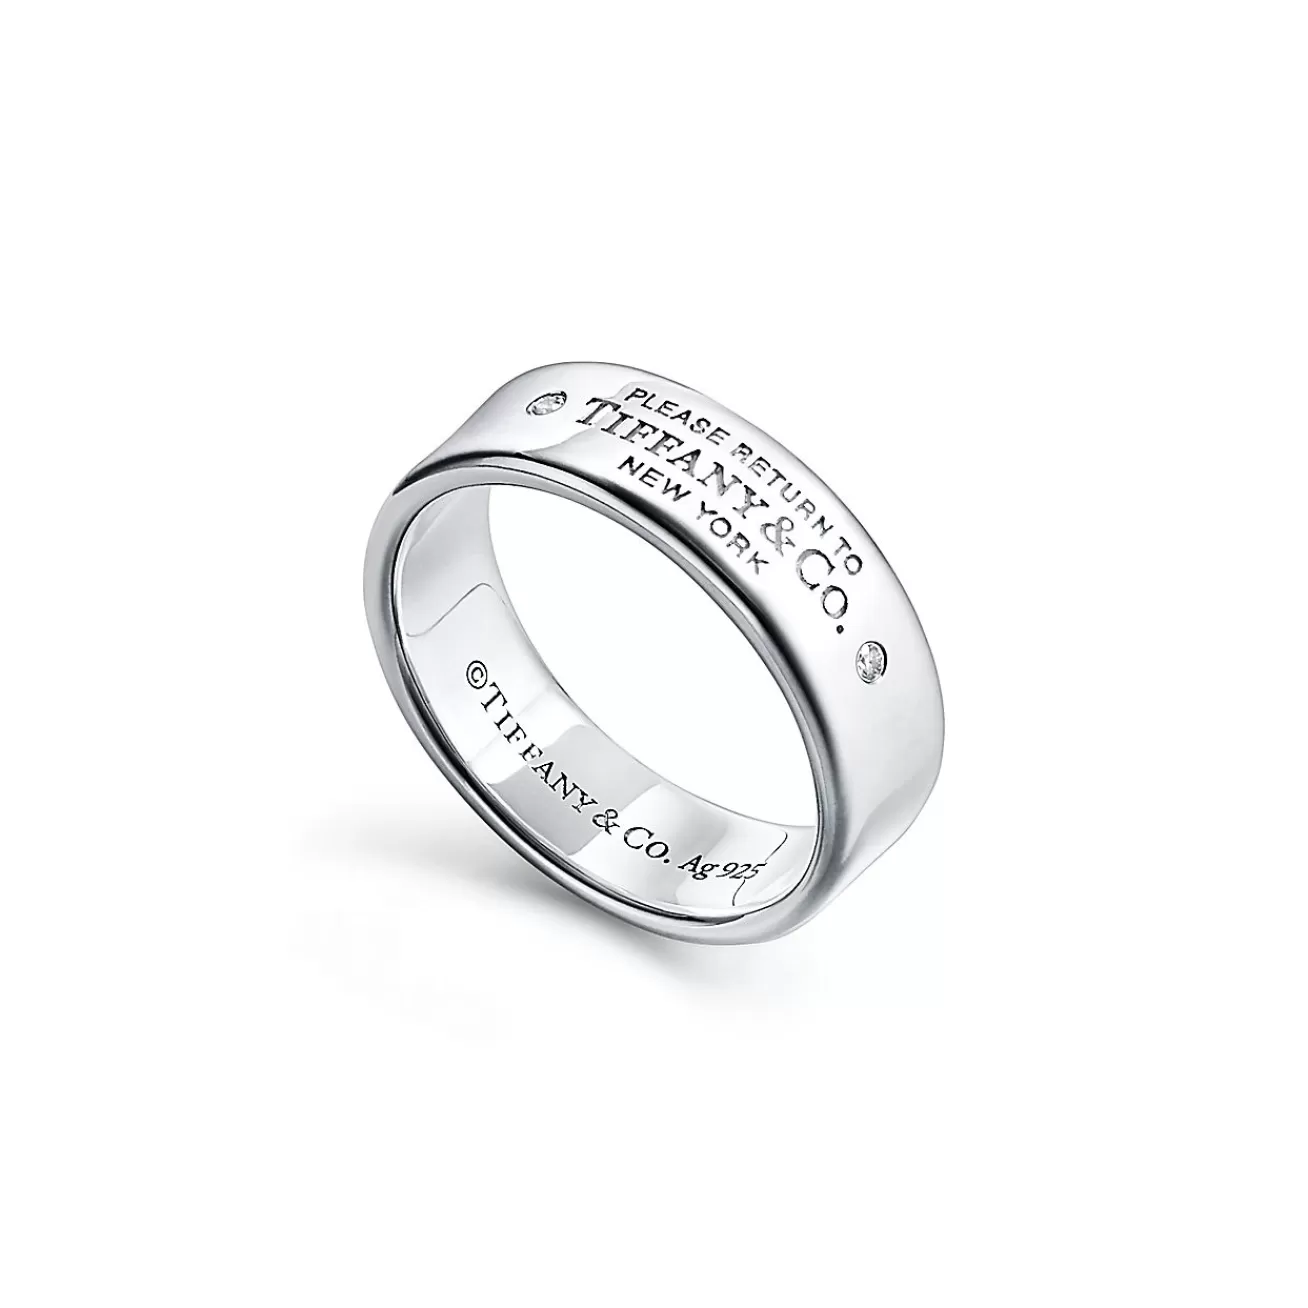 Tiffany & Co. Return to Tiffany® narrow ring in sterling silver with diamonds, 6 mm wide. | ^ Rings | Bold Silver Jewelry